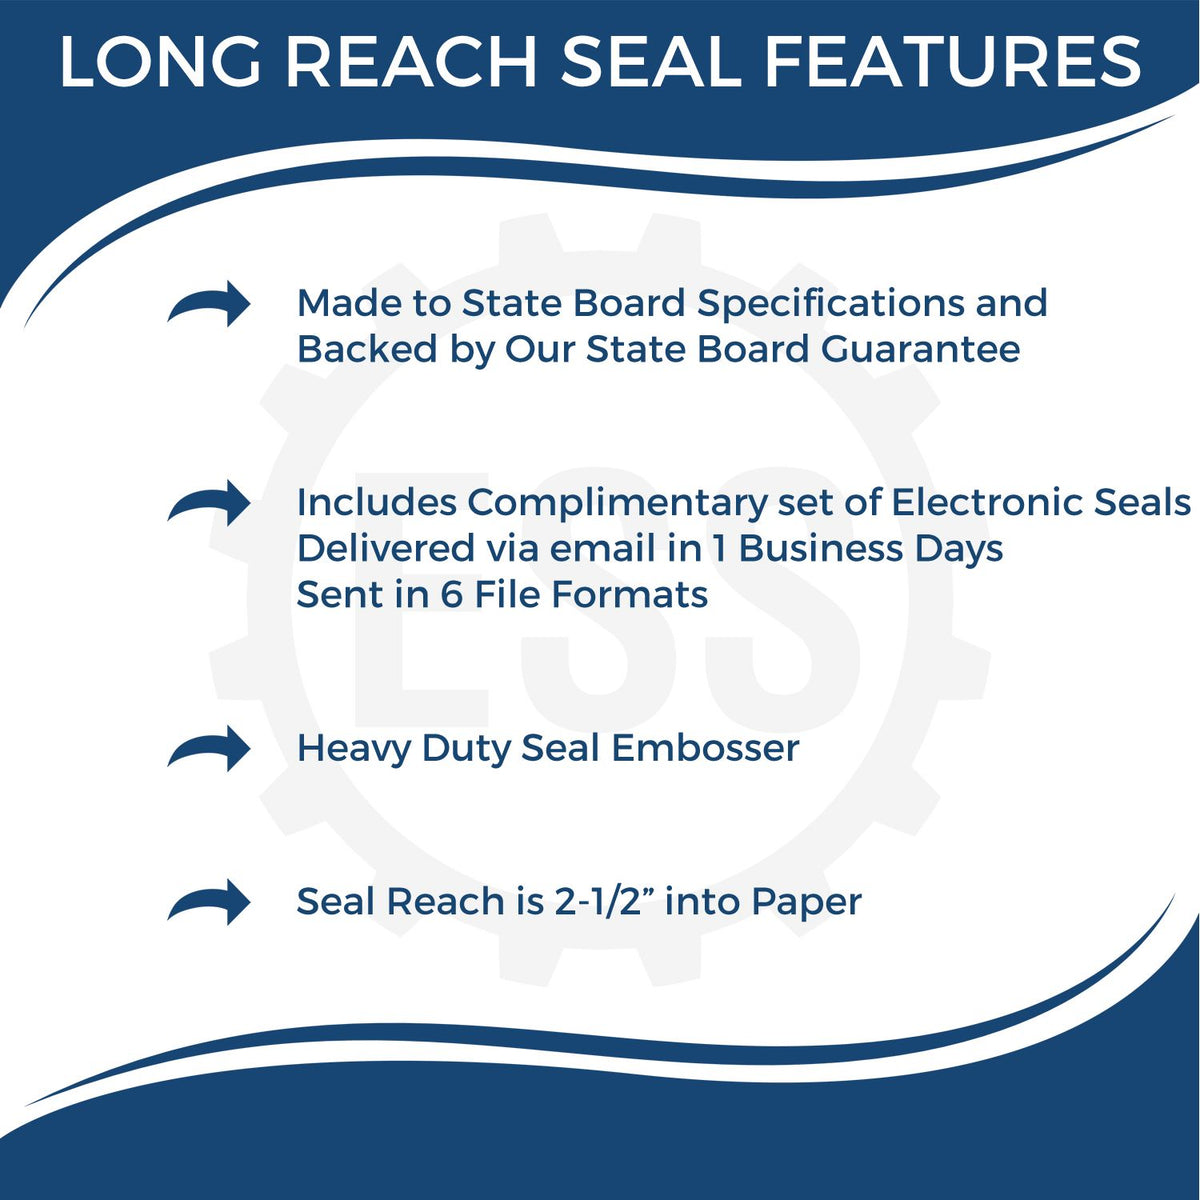 A picture of an infographic highlighting the selling points for the Long Reach Kentucky PE Seal